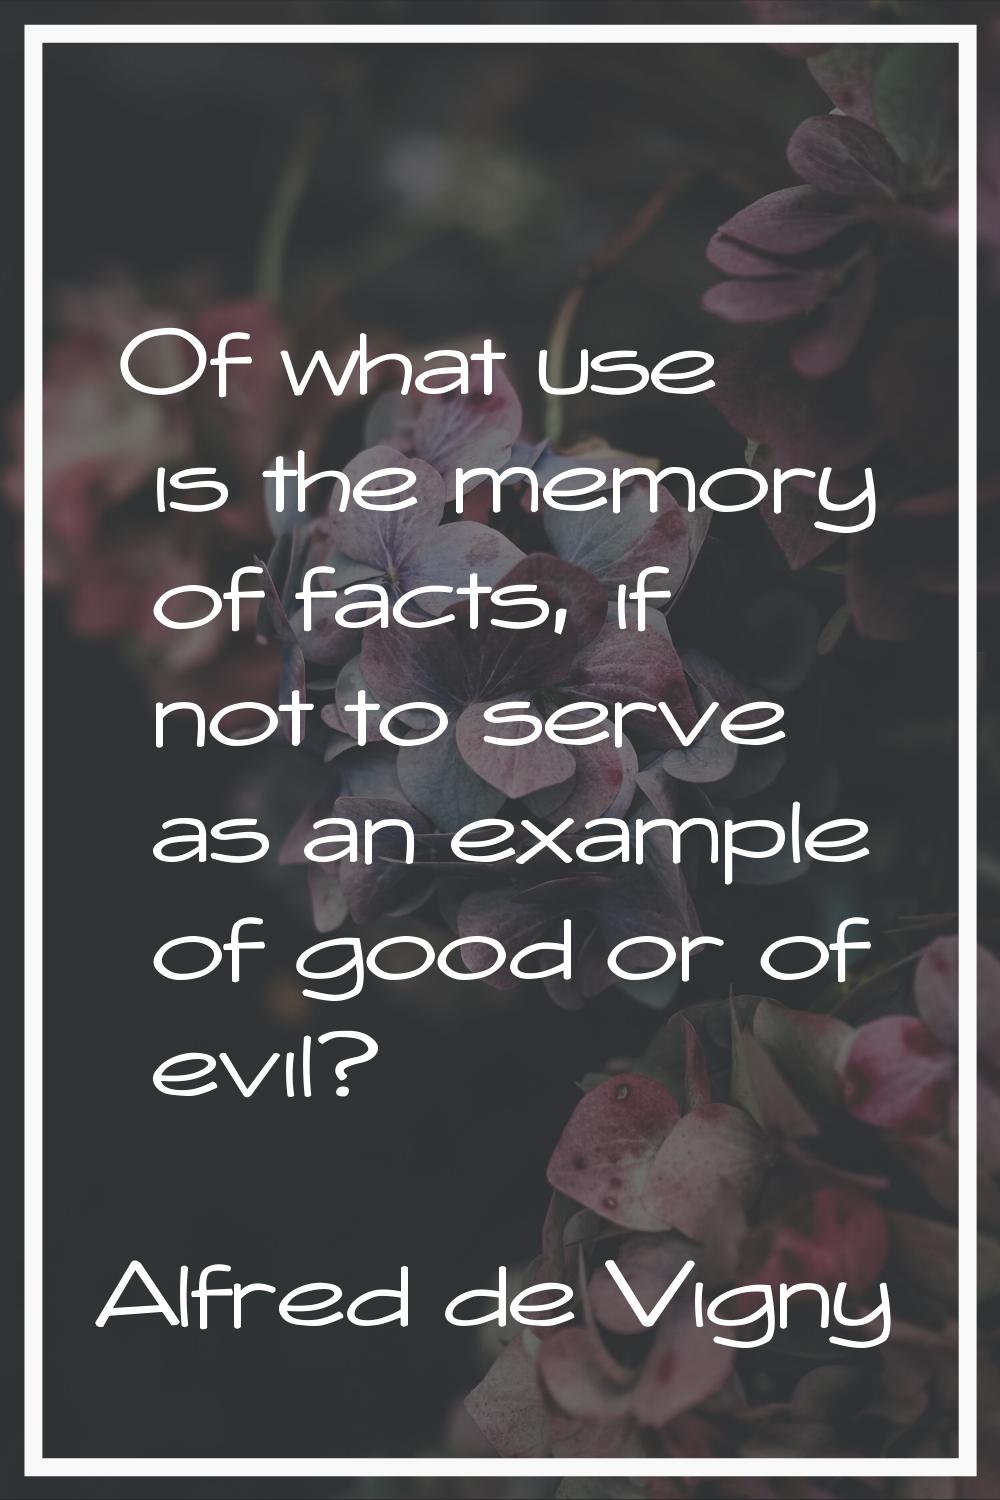 Of what use is the memory of facts, if not to serve as an example of good or of evil?